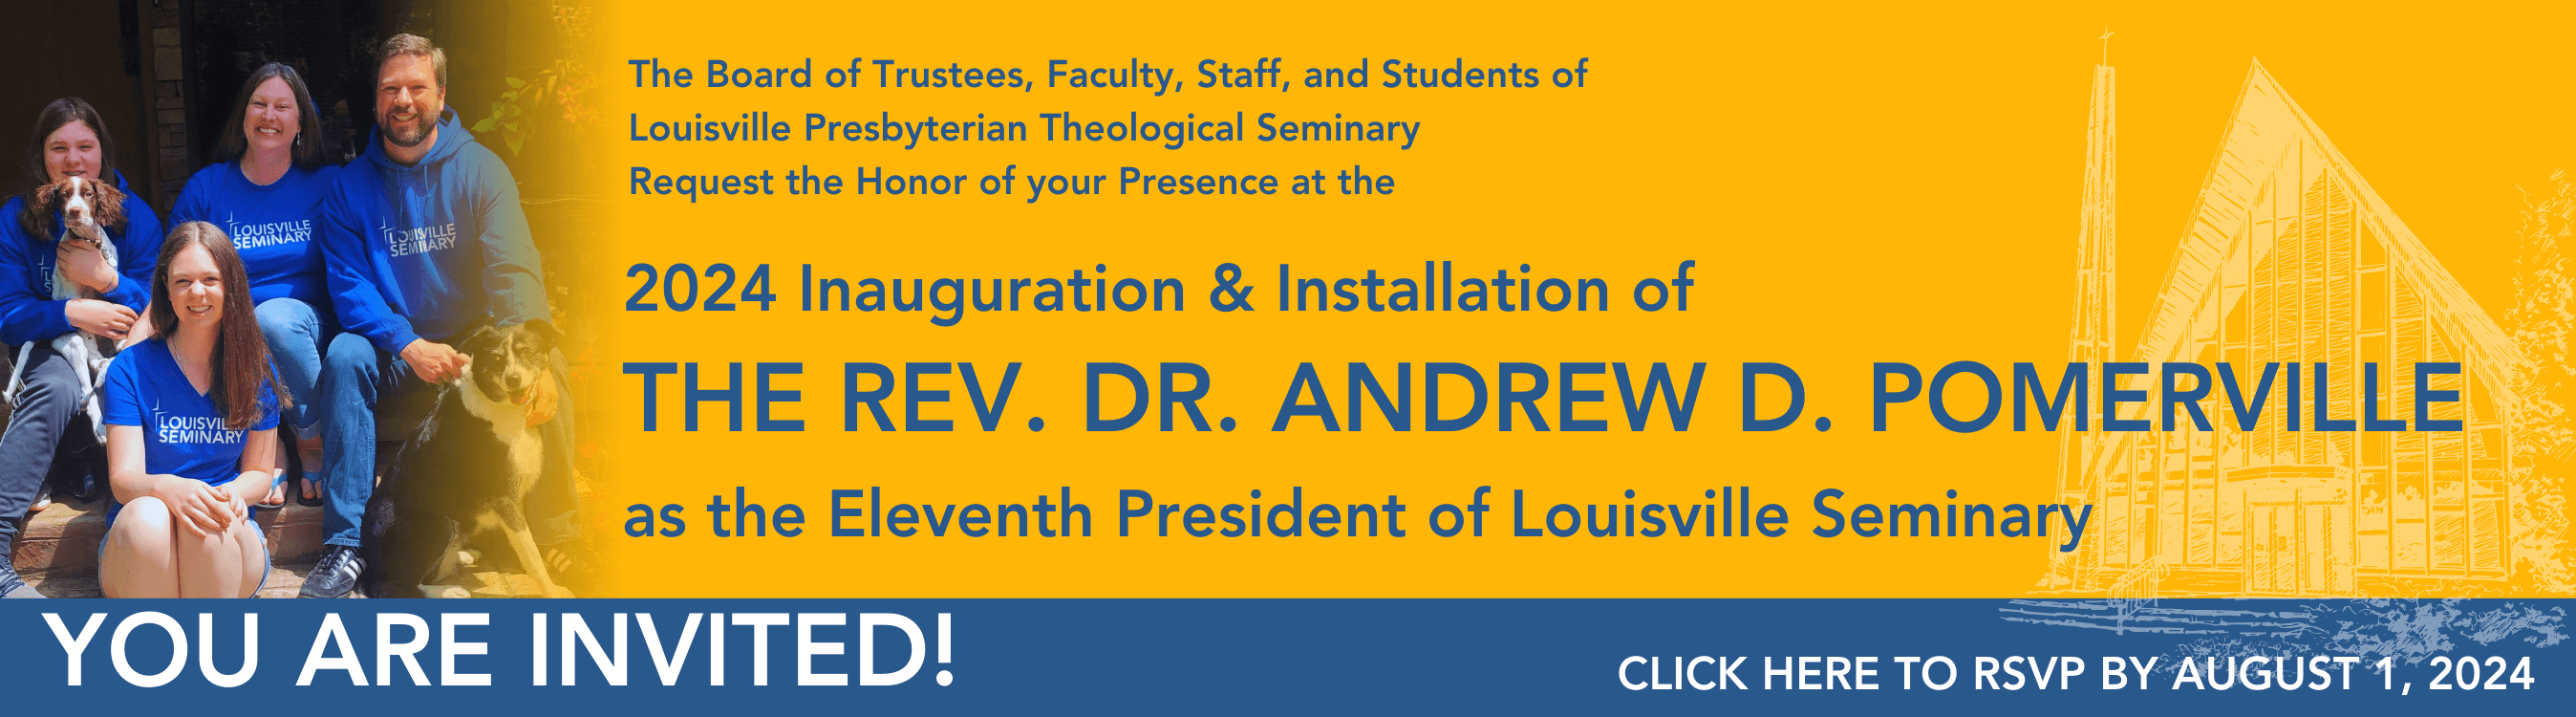 2024 Inauguration and Installation of The Rev. Dr. Andrew  D. Pomerville